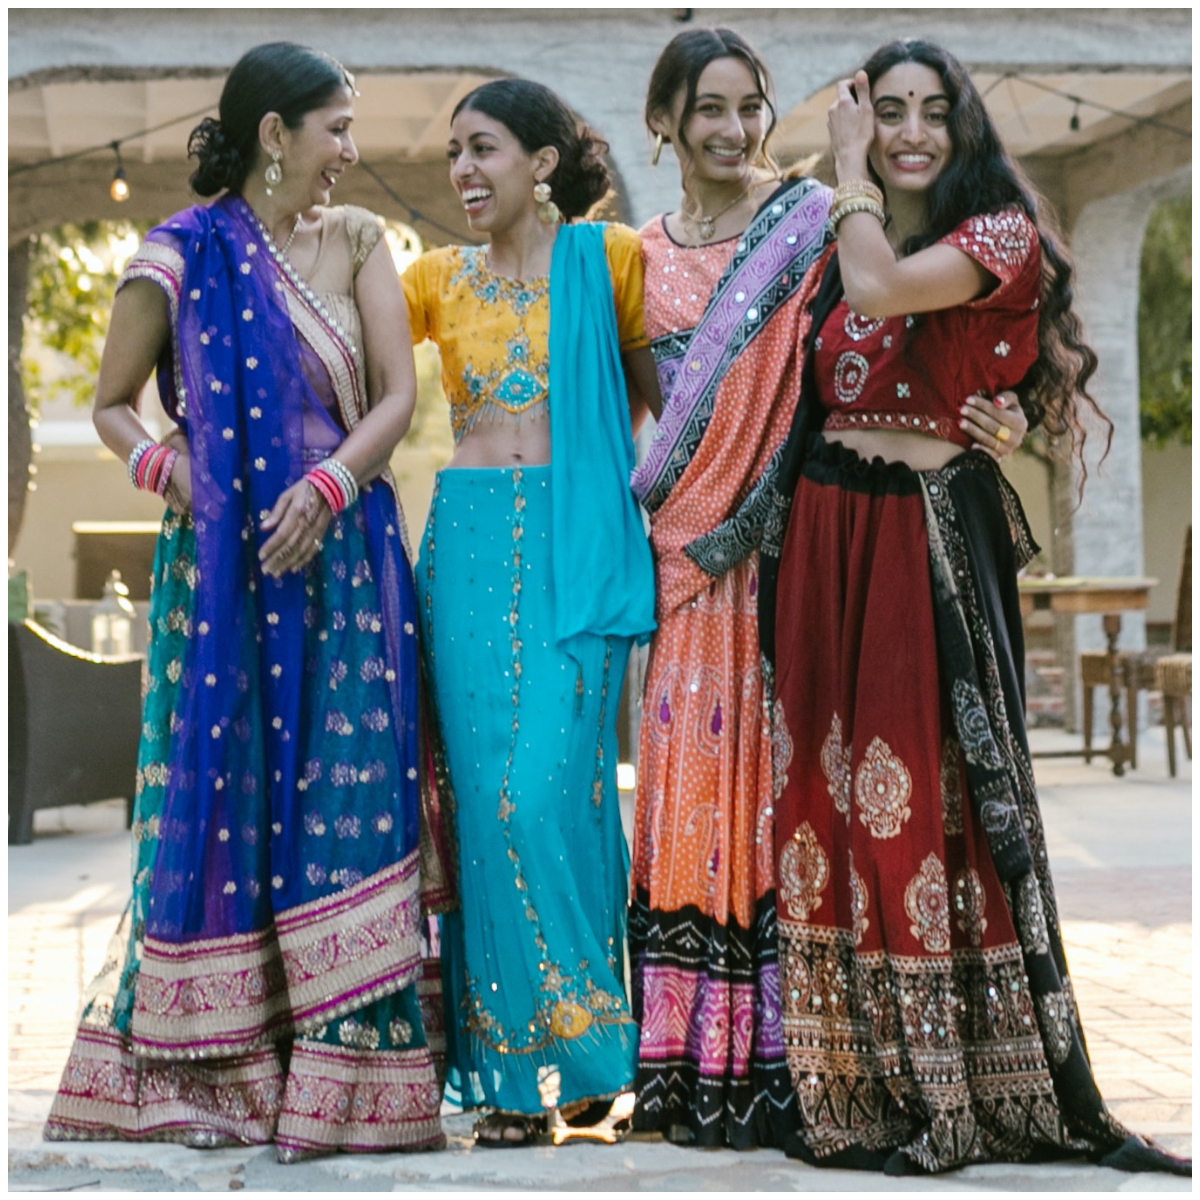 All about Traditional Rajasthani dresses for men and women - Jaipur Stuff